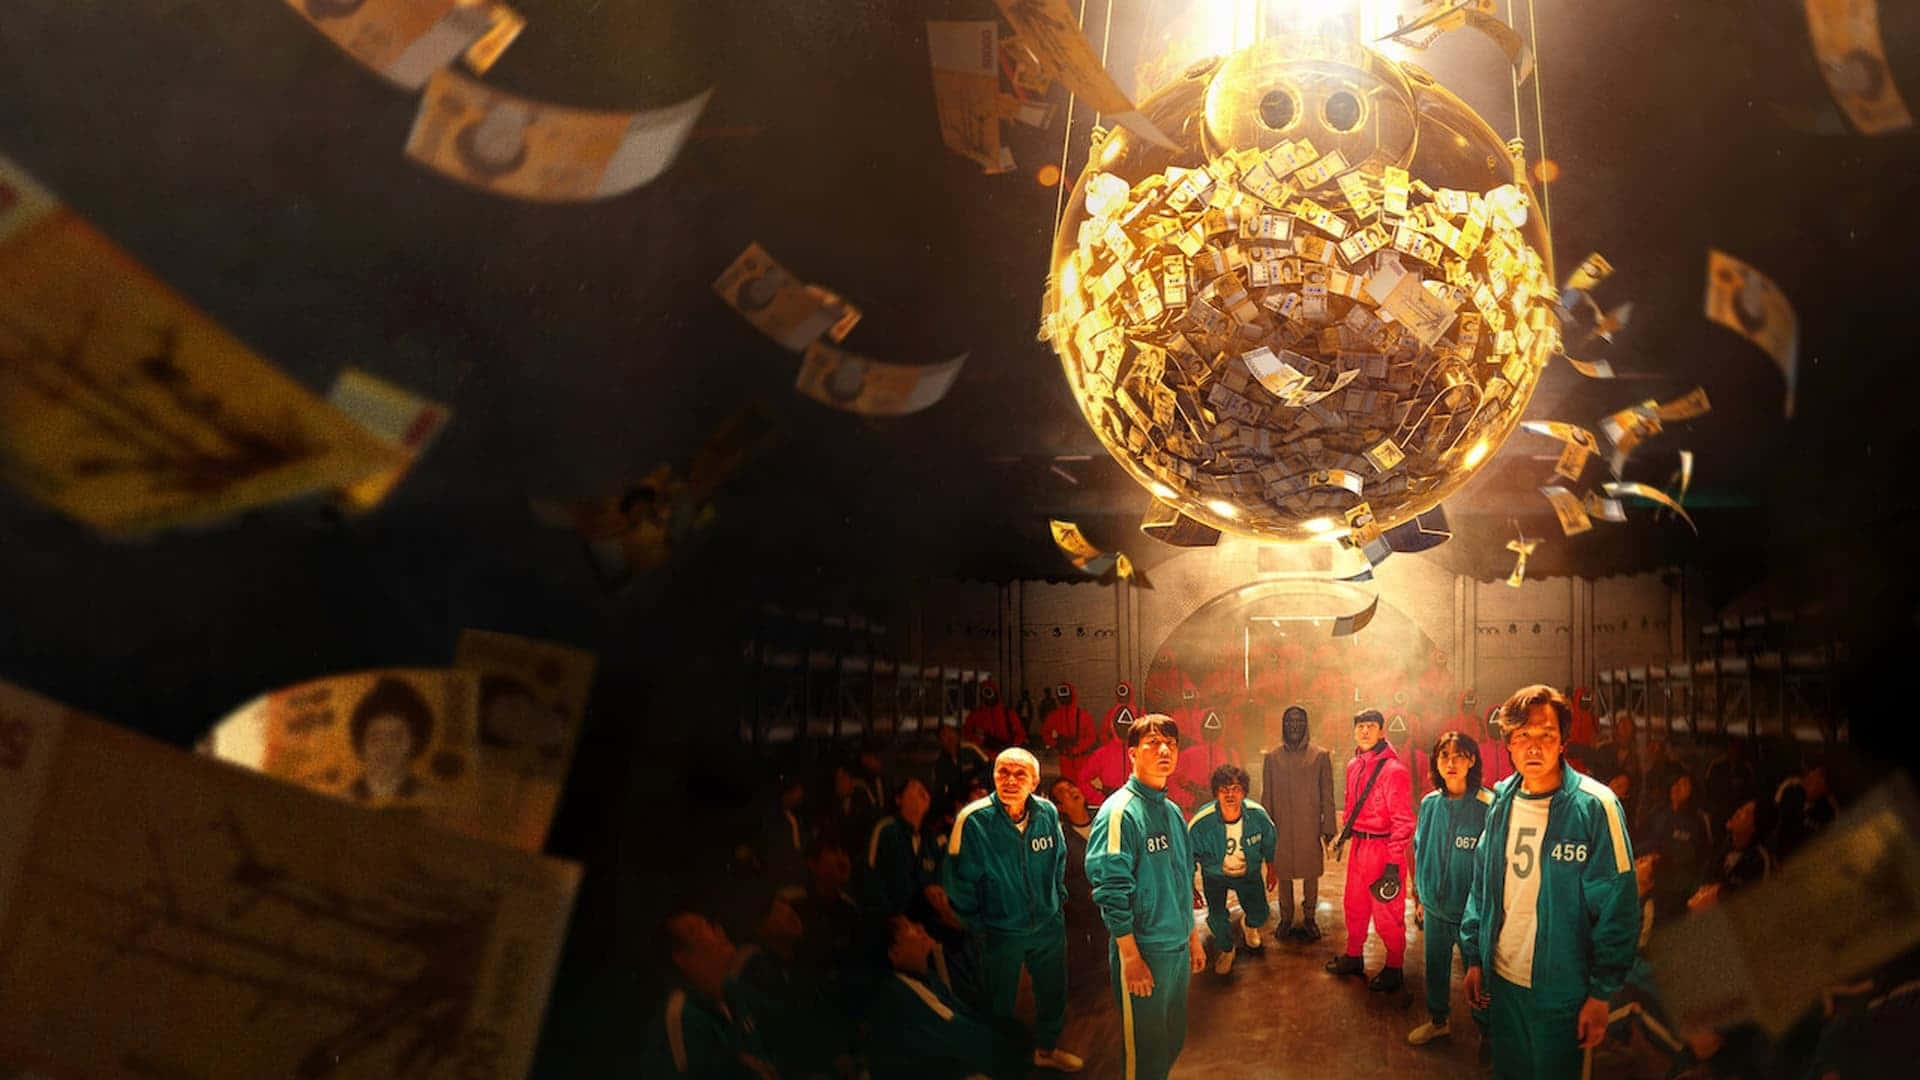 A Group Of People Standing In Front Of A Large Ball Of Money